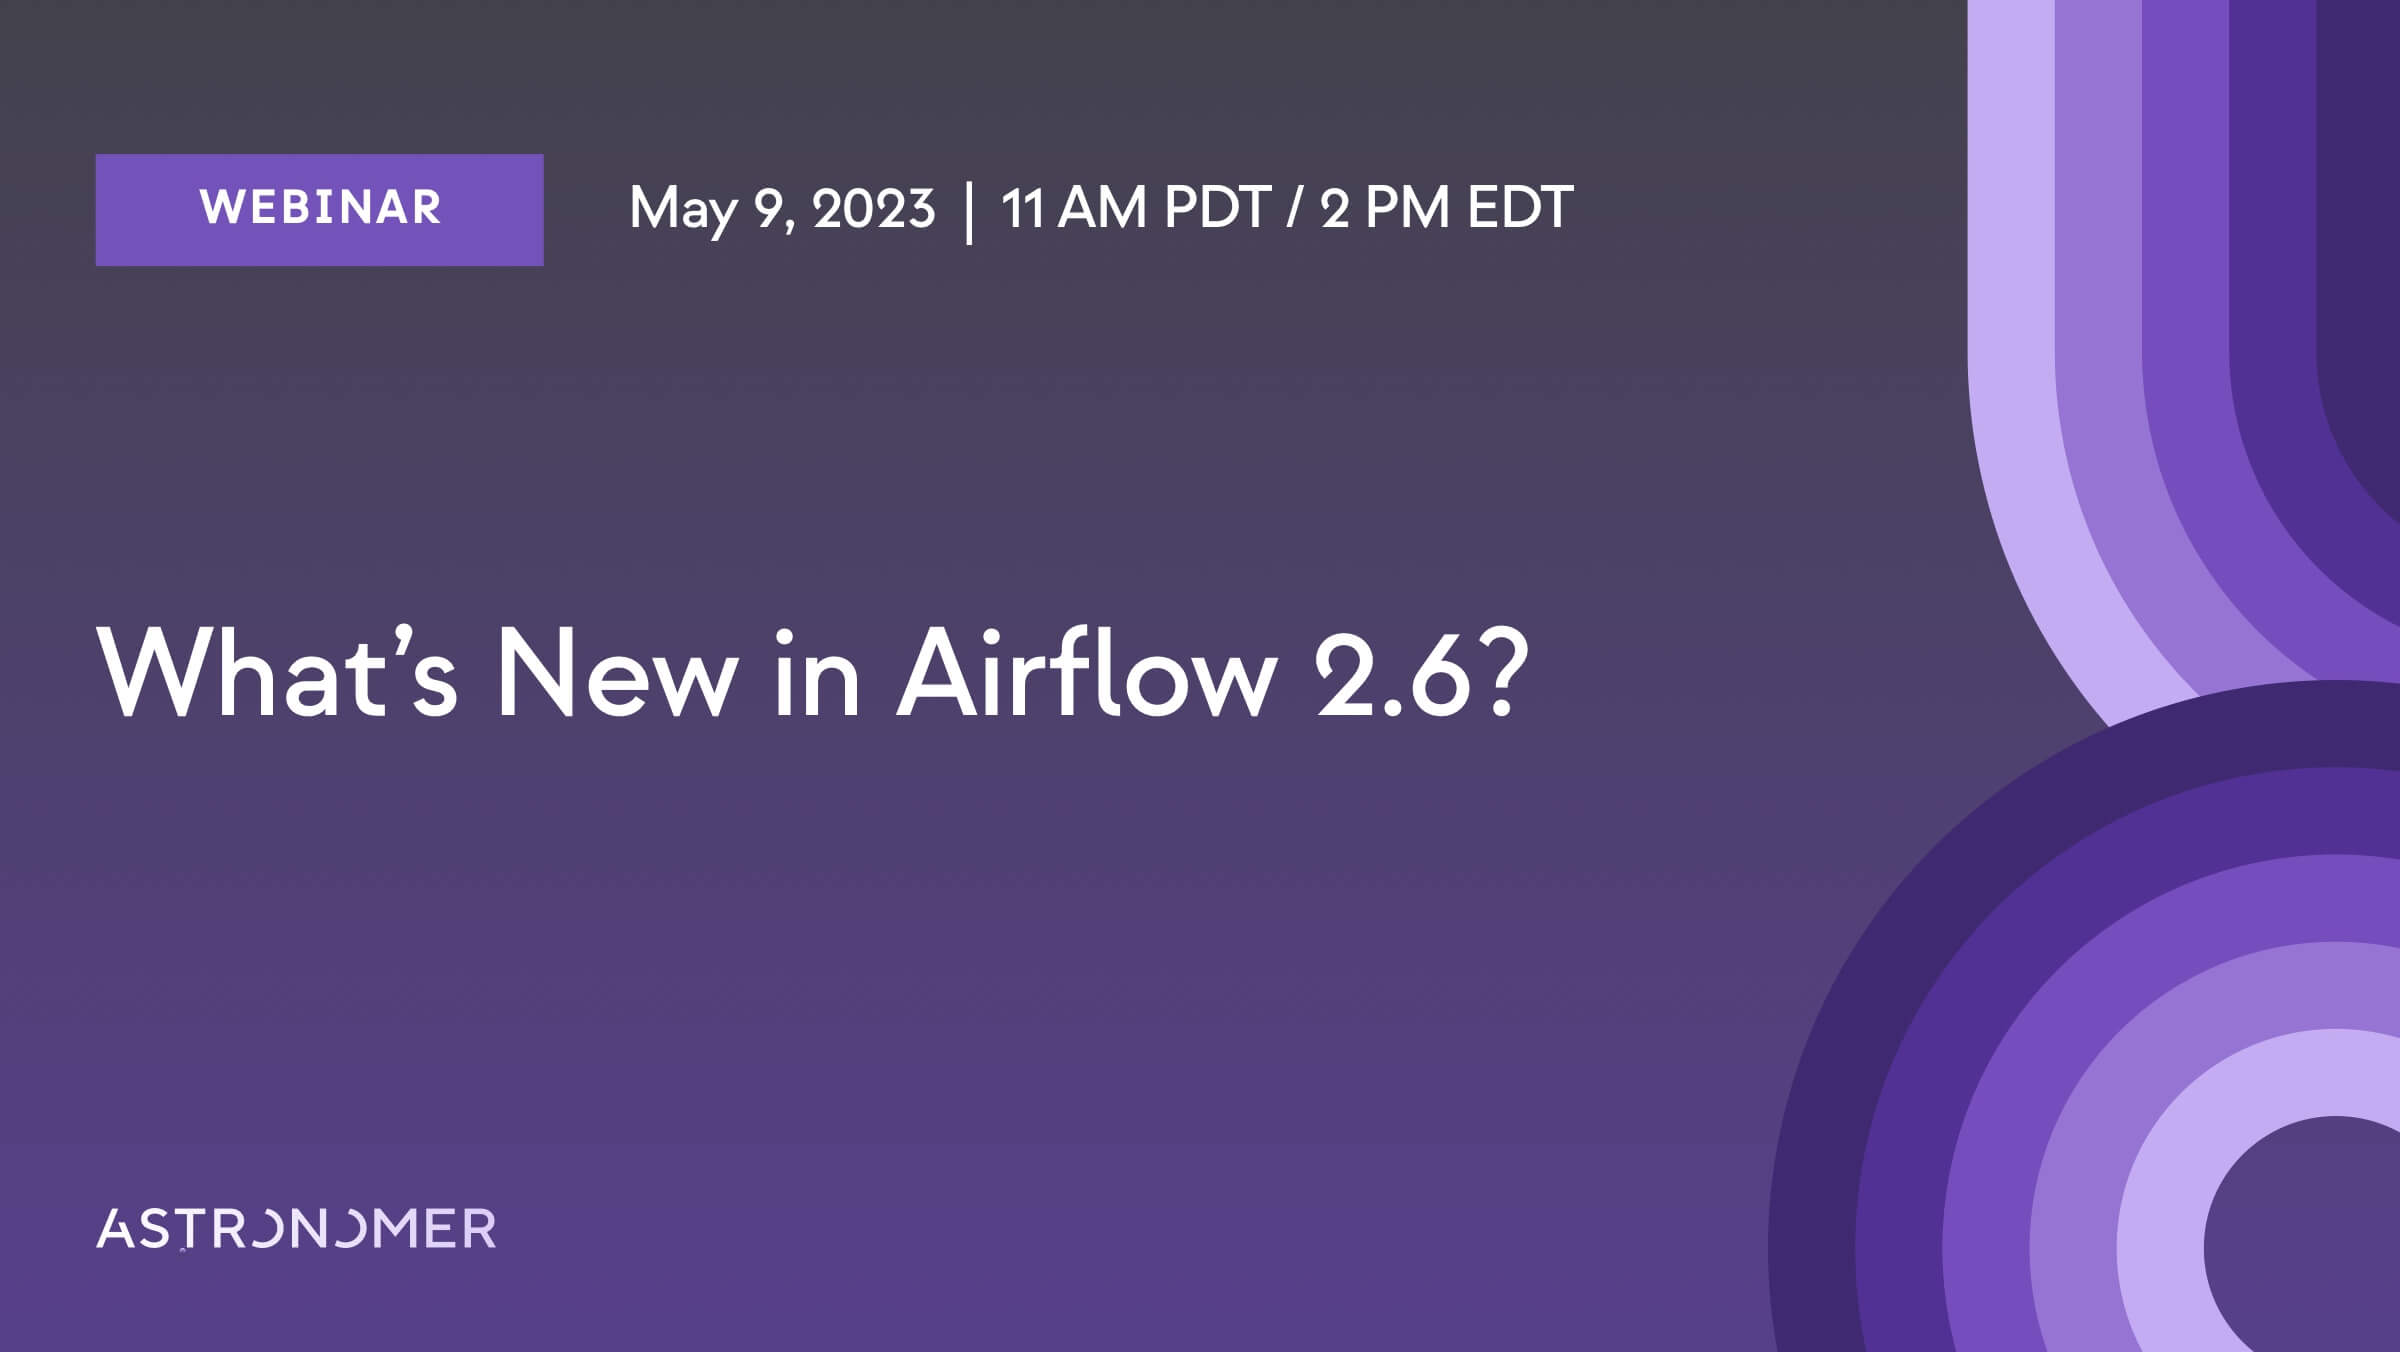 What’s New in Airflow 2.6